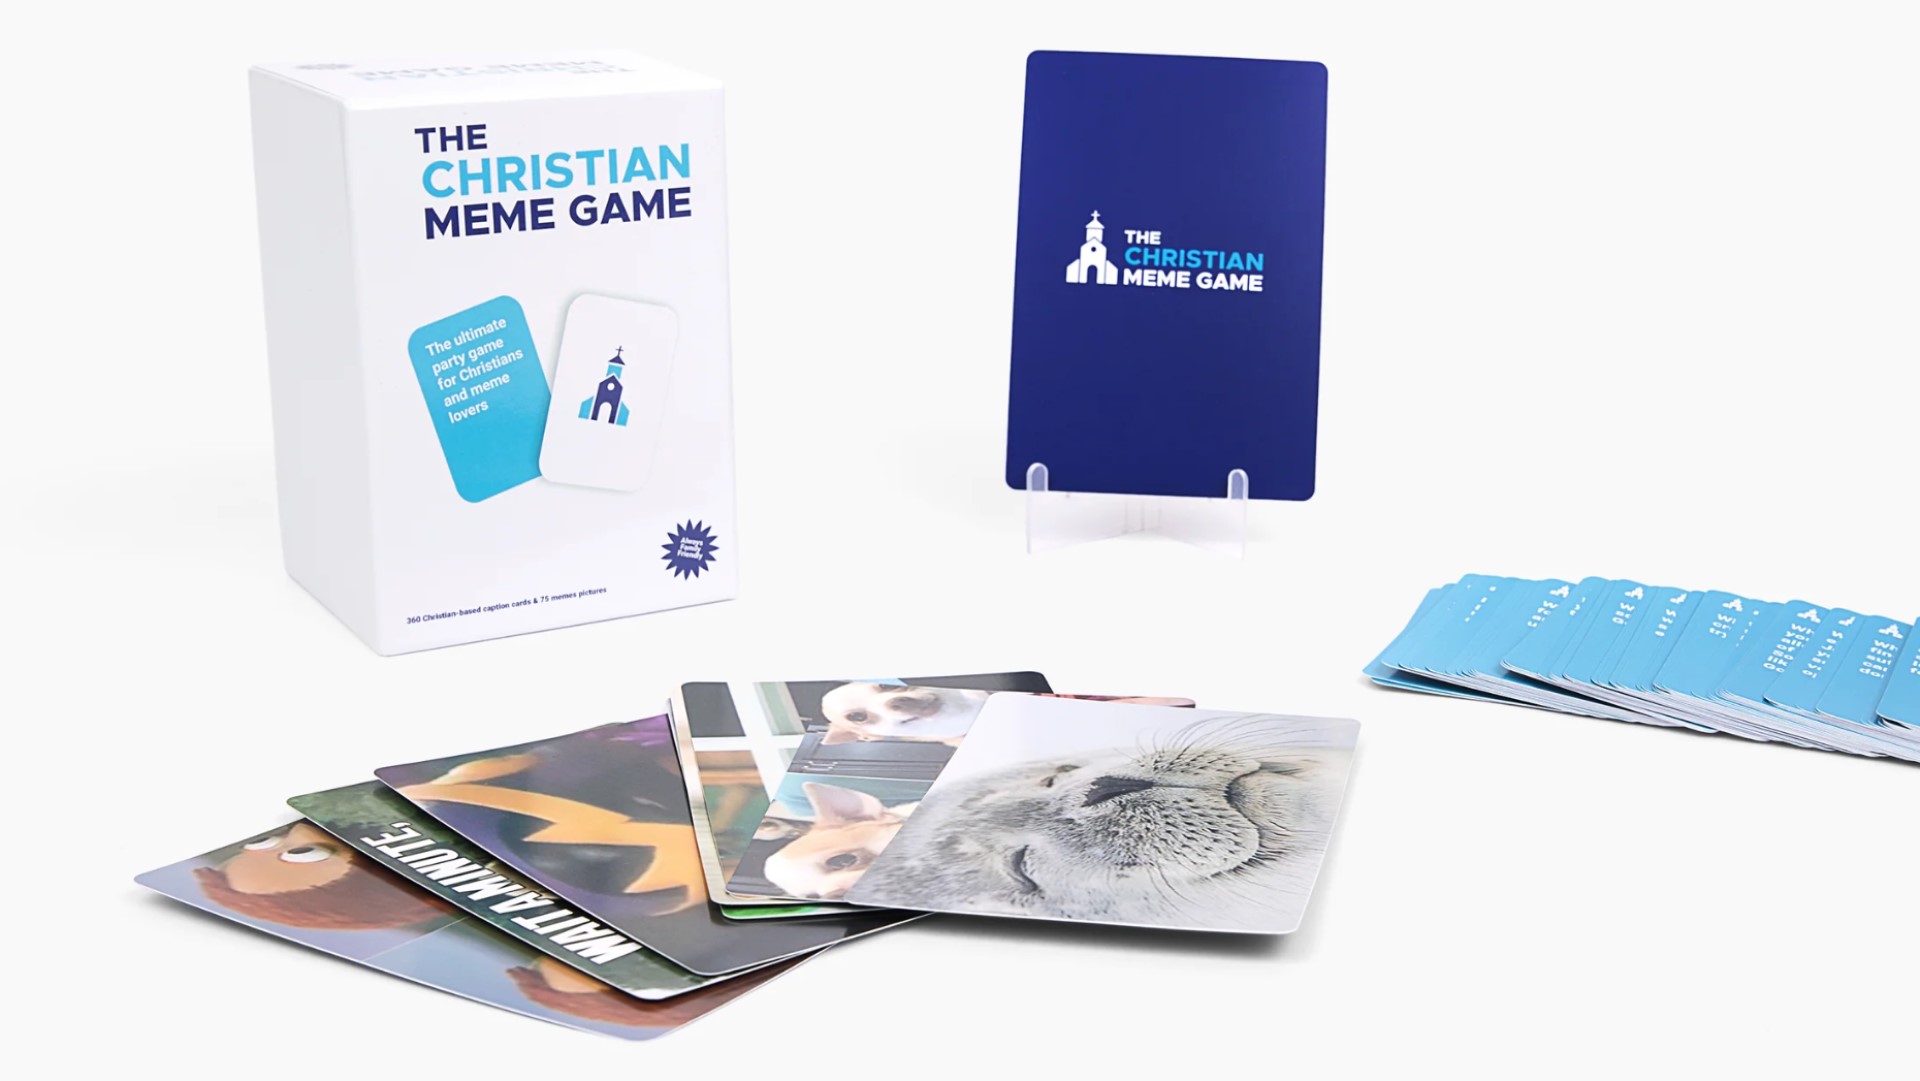 Party Game News: What Do You Meme? Offering Custom Cards